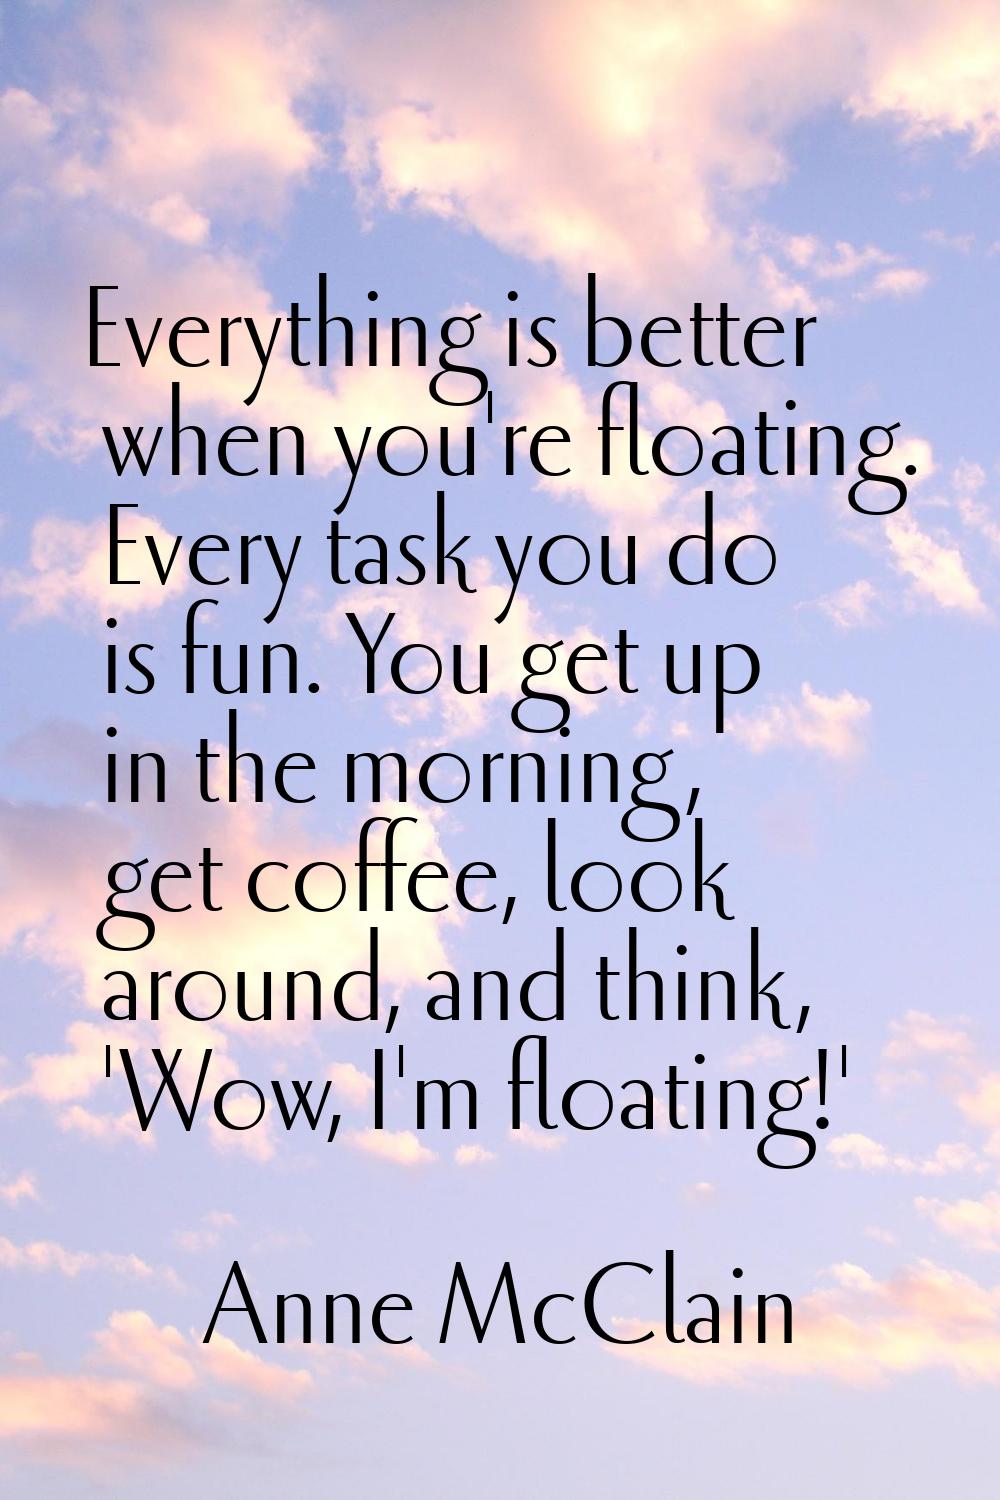 Everything is better when you're floating. Every task you do is fun. You get up in the morning, get